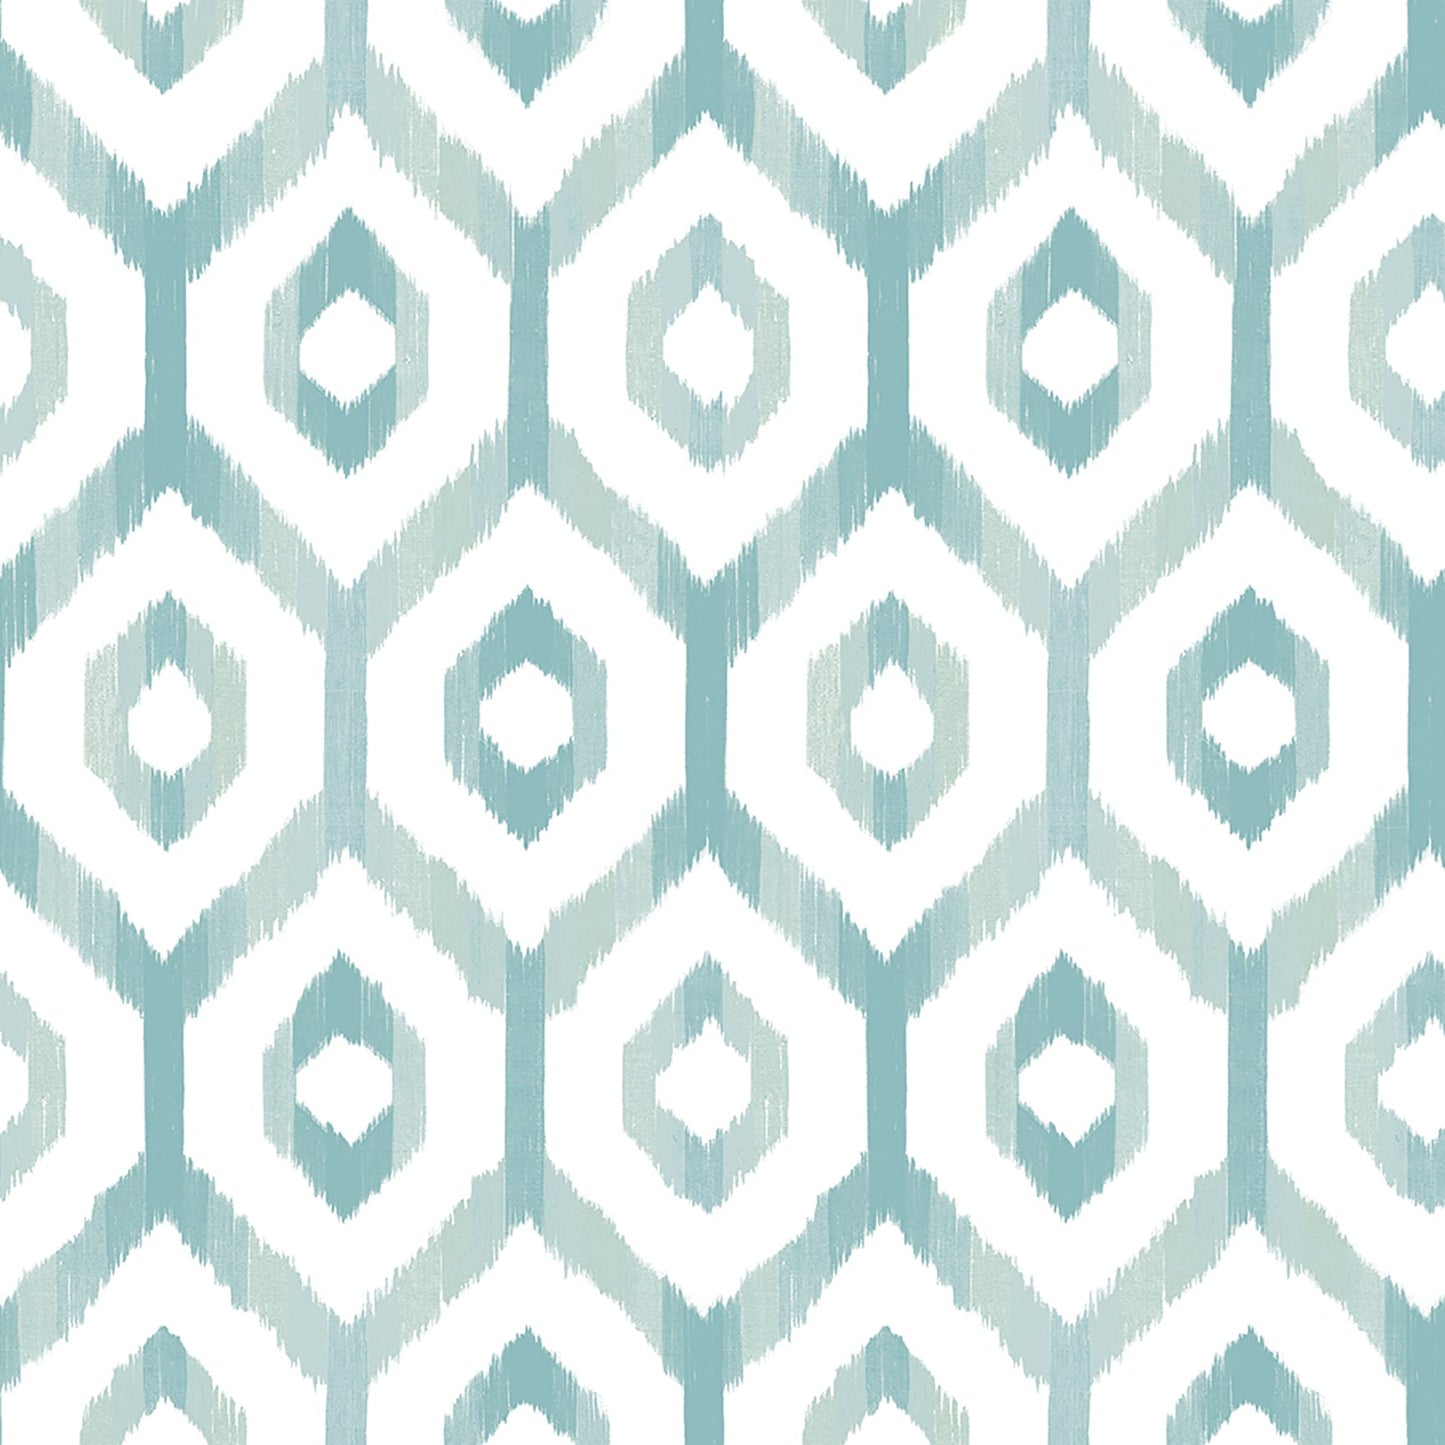 Purchase 2744-24142 Solstice Teal Geometric A-Street Prints Wallpaper